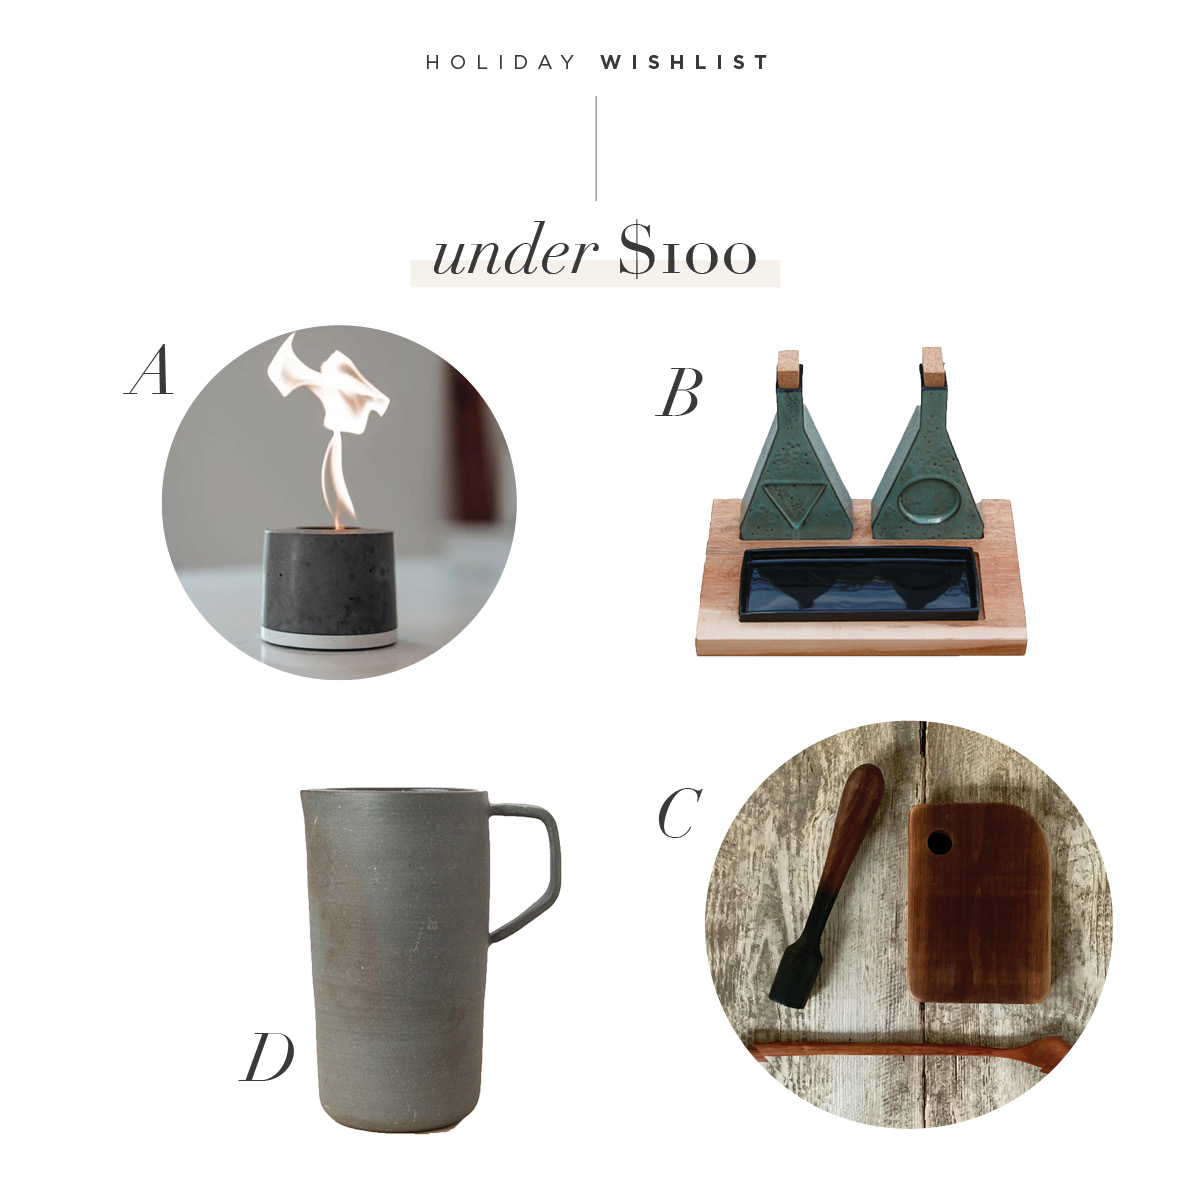 Our Wishlist From The Dowry – Unique, Ethical Gifting Under $100